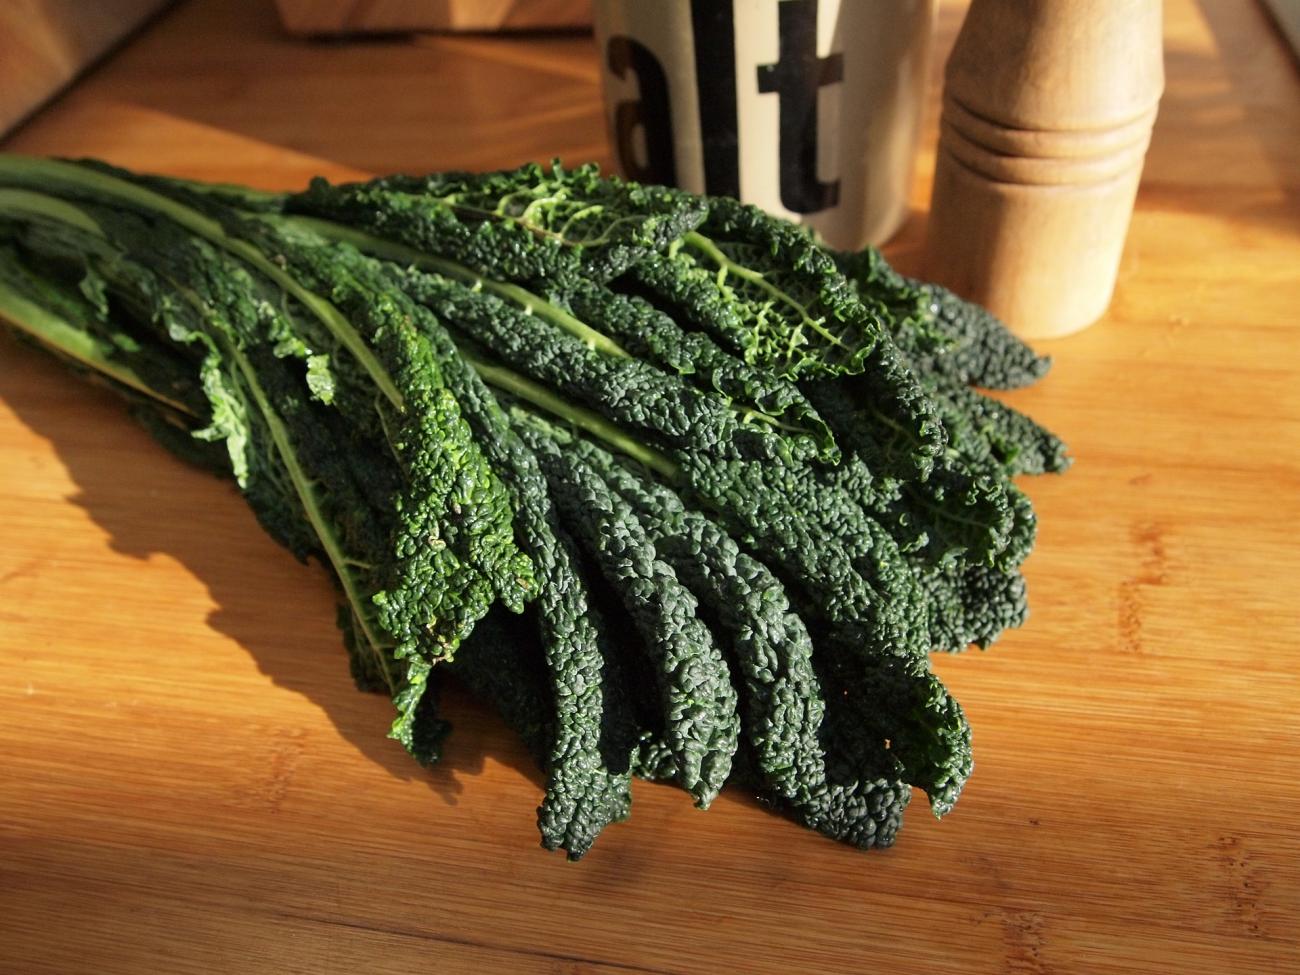 Kale on a kitchen counter.